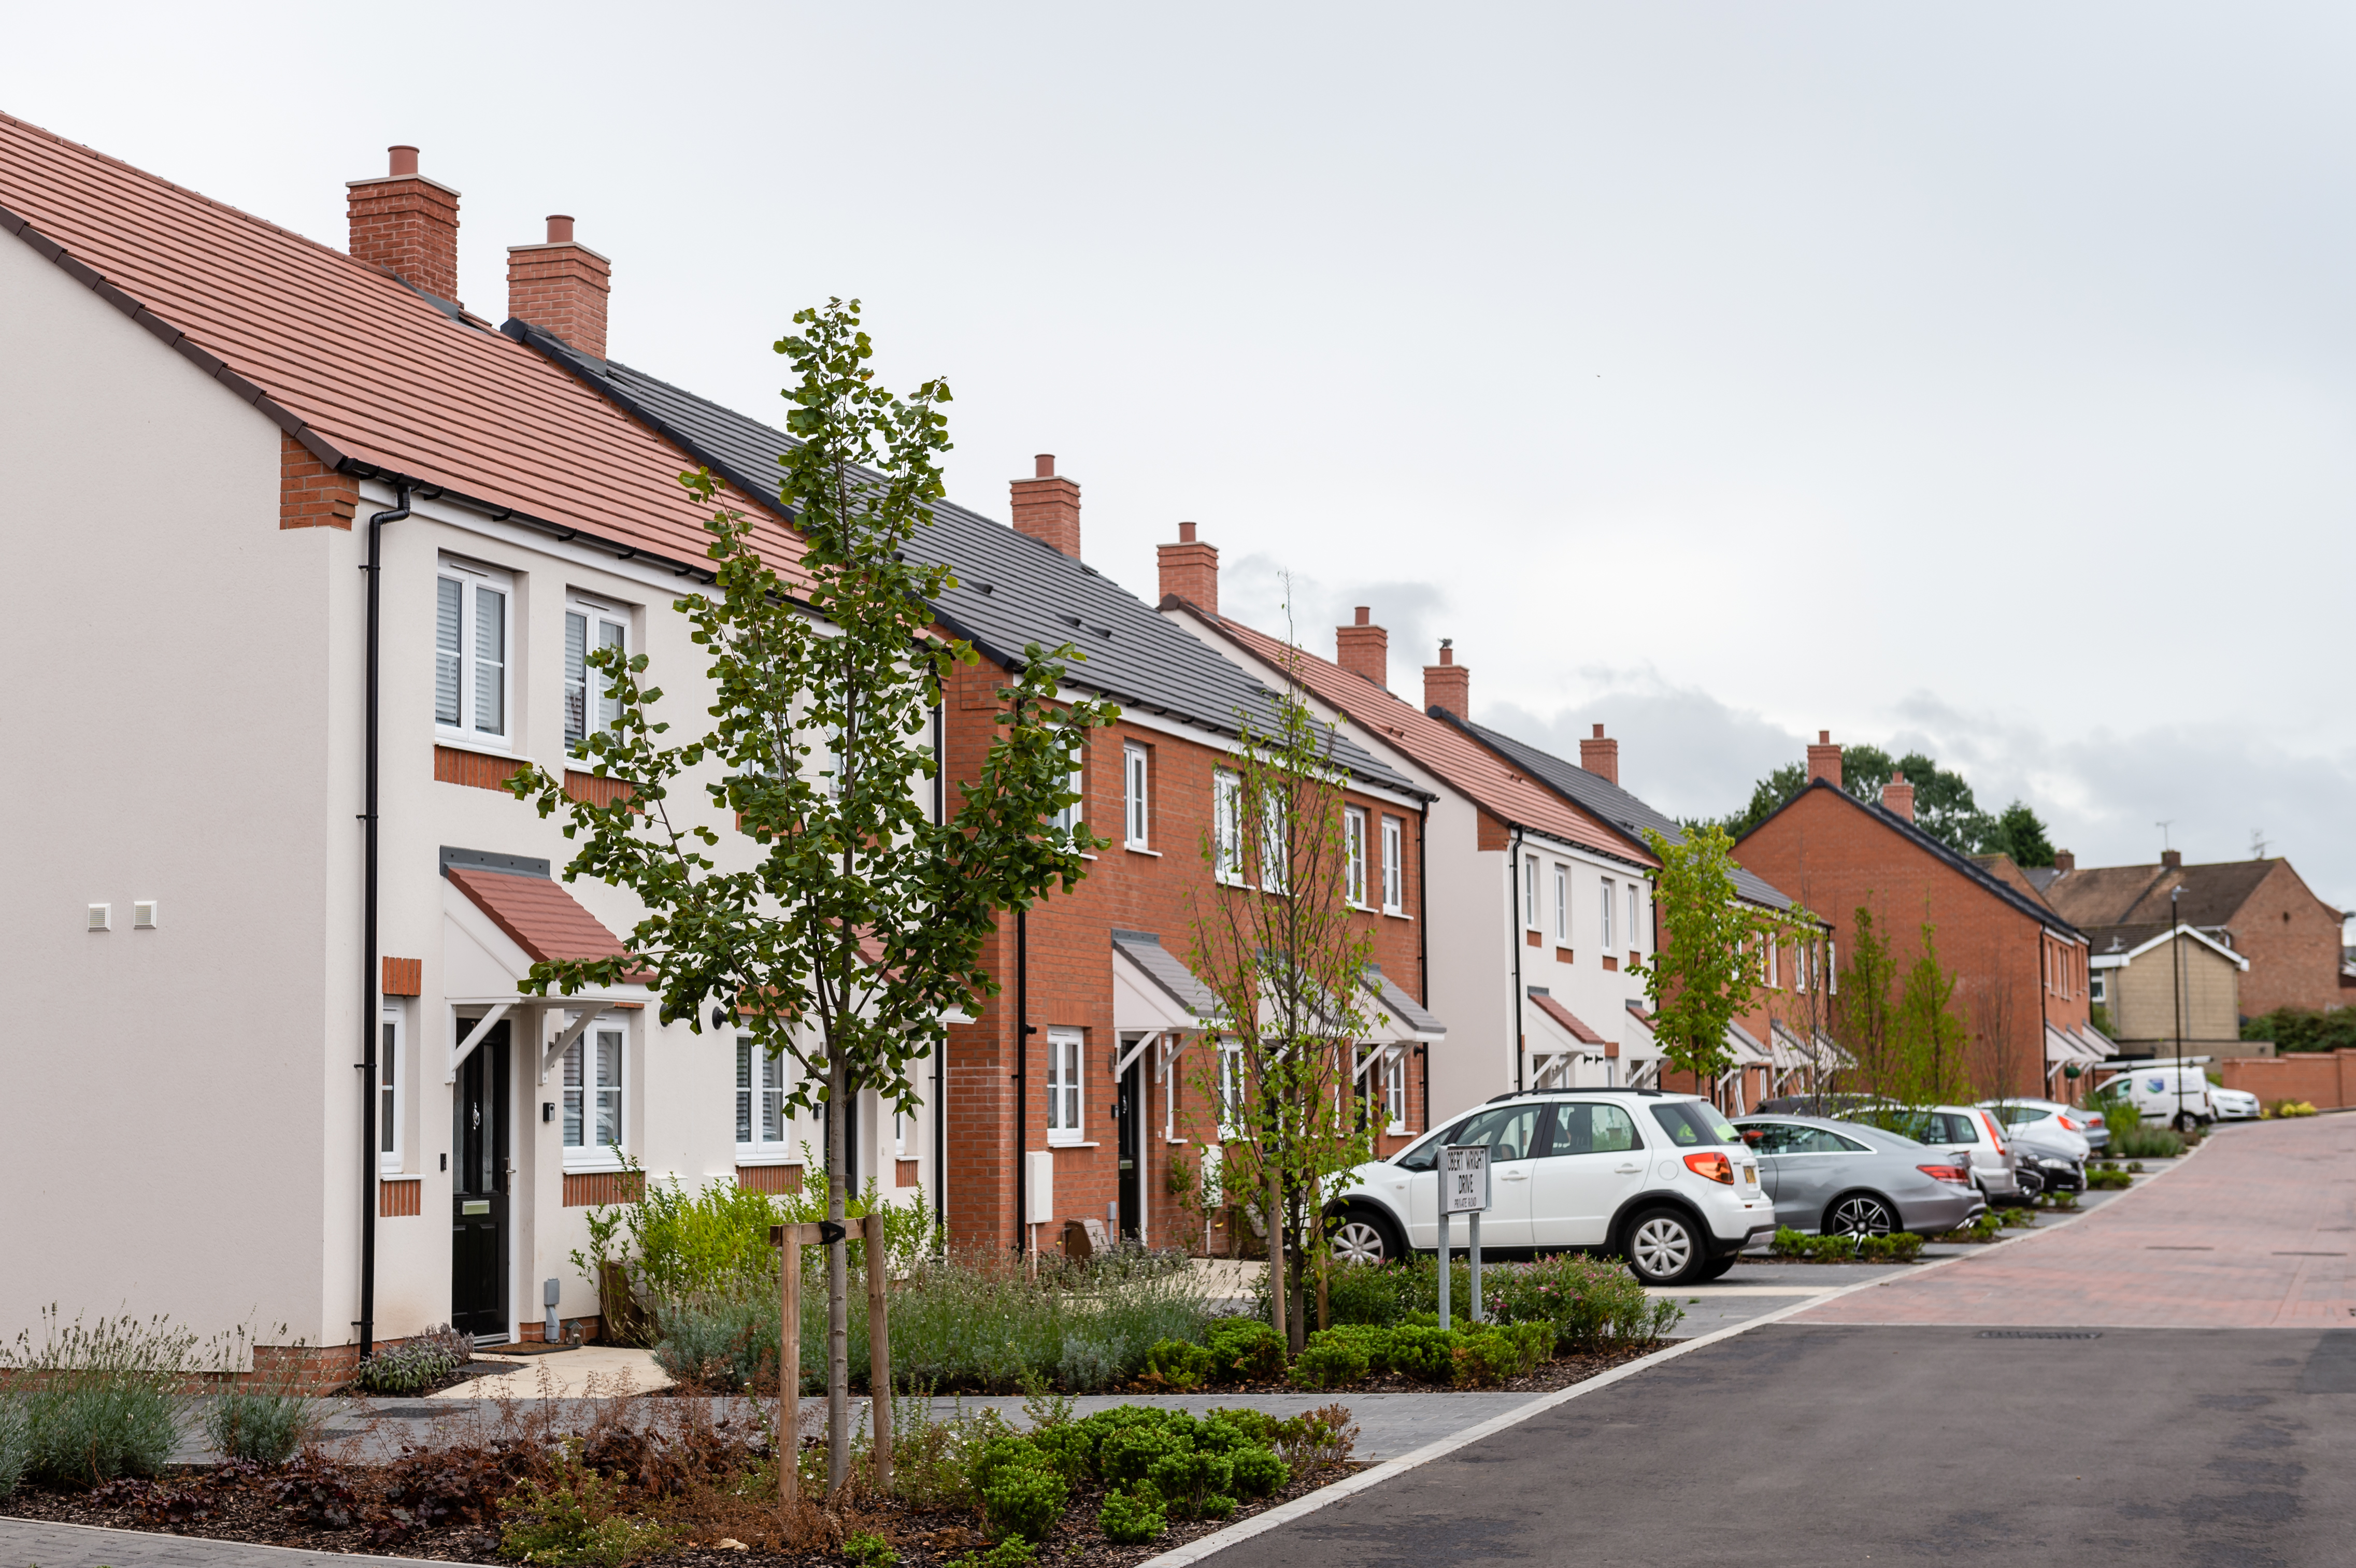 Row of new-build houses with front gardens and cars parked on driveways